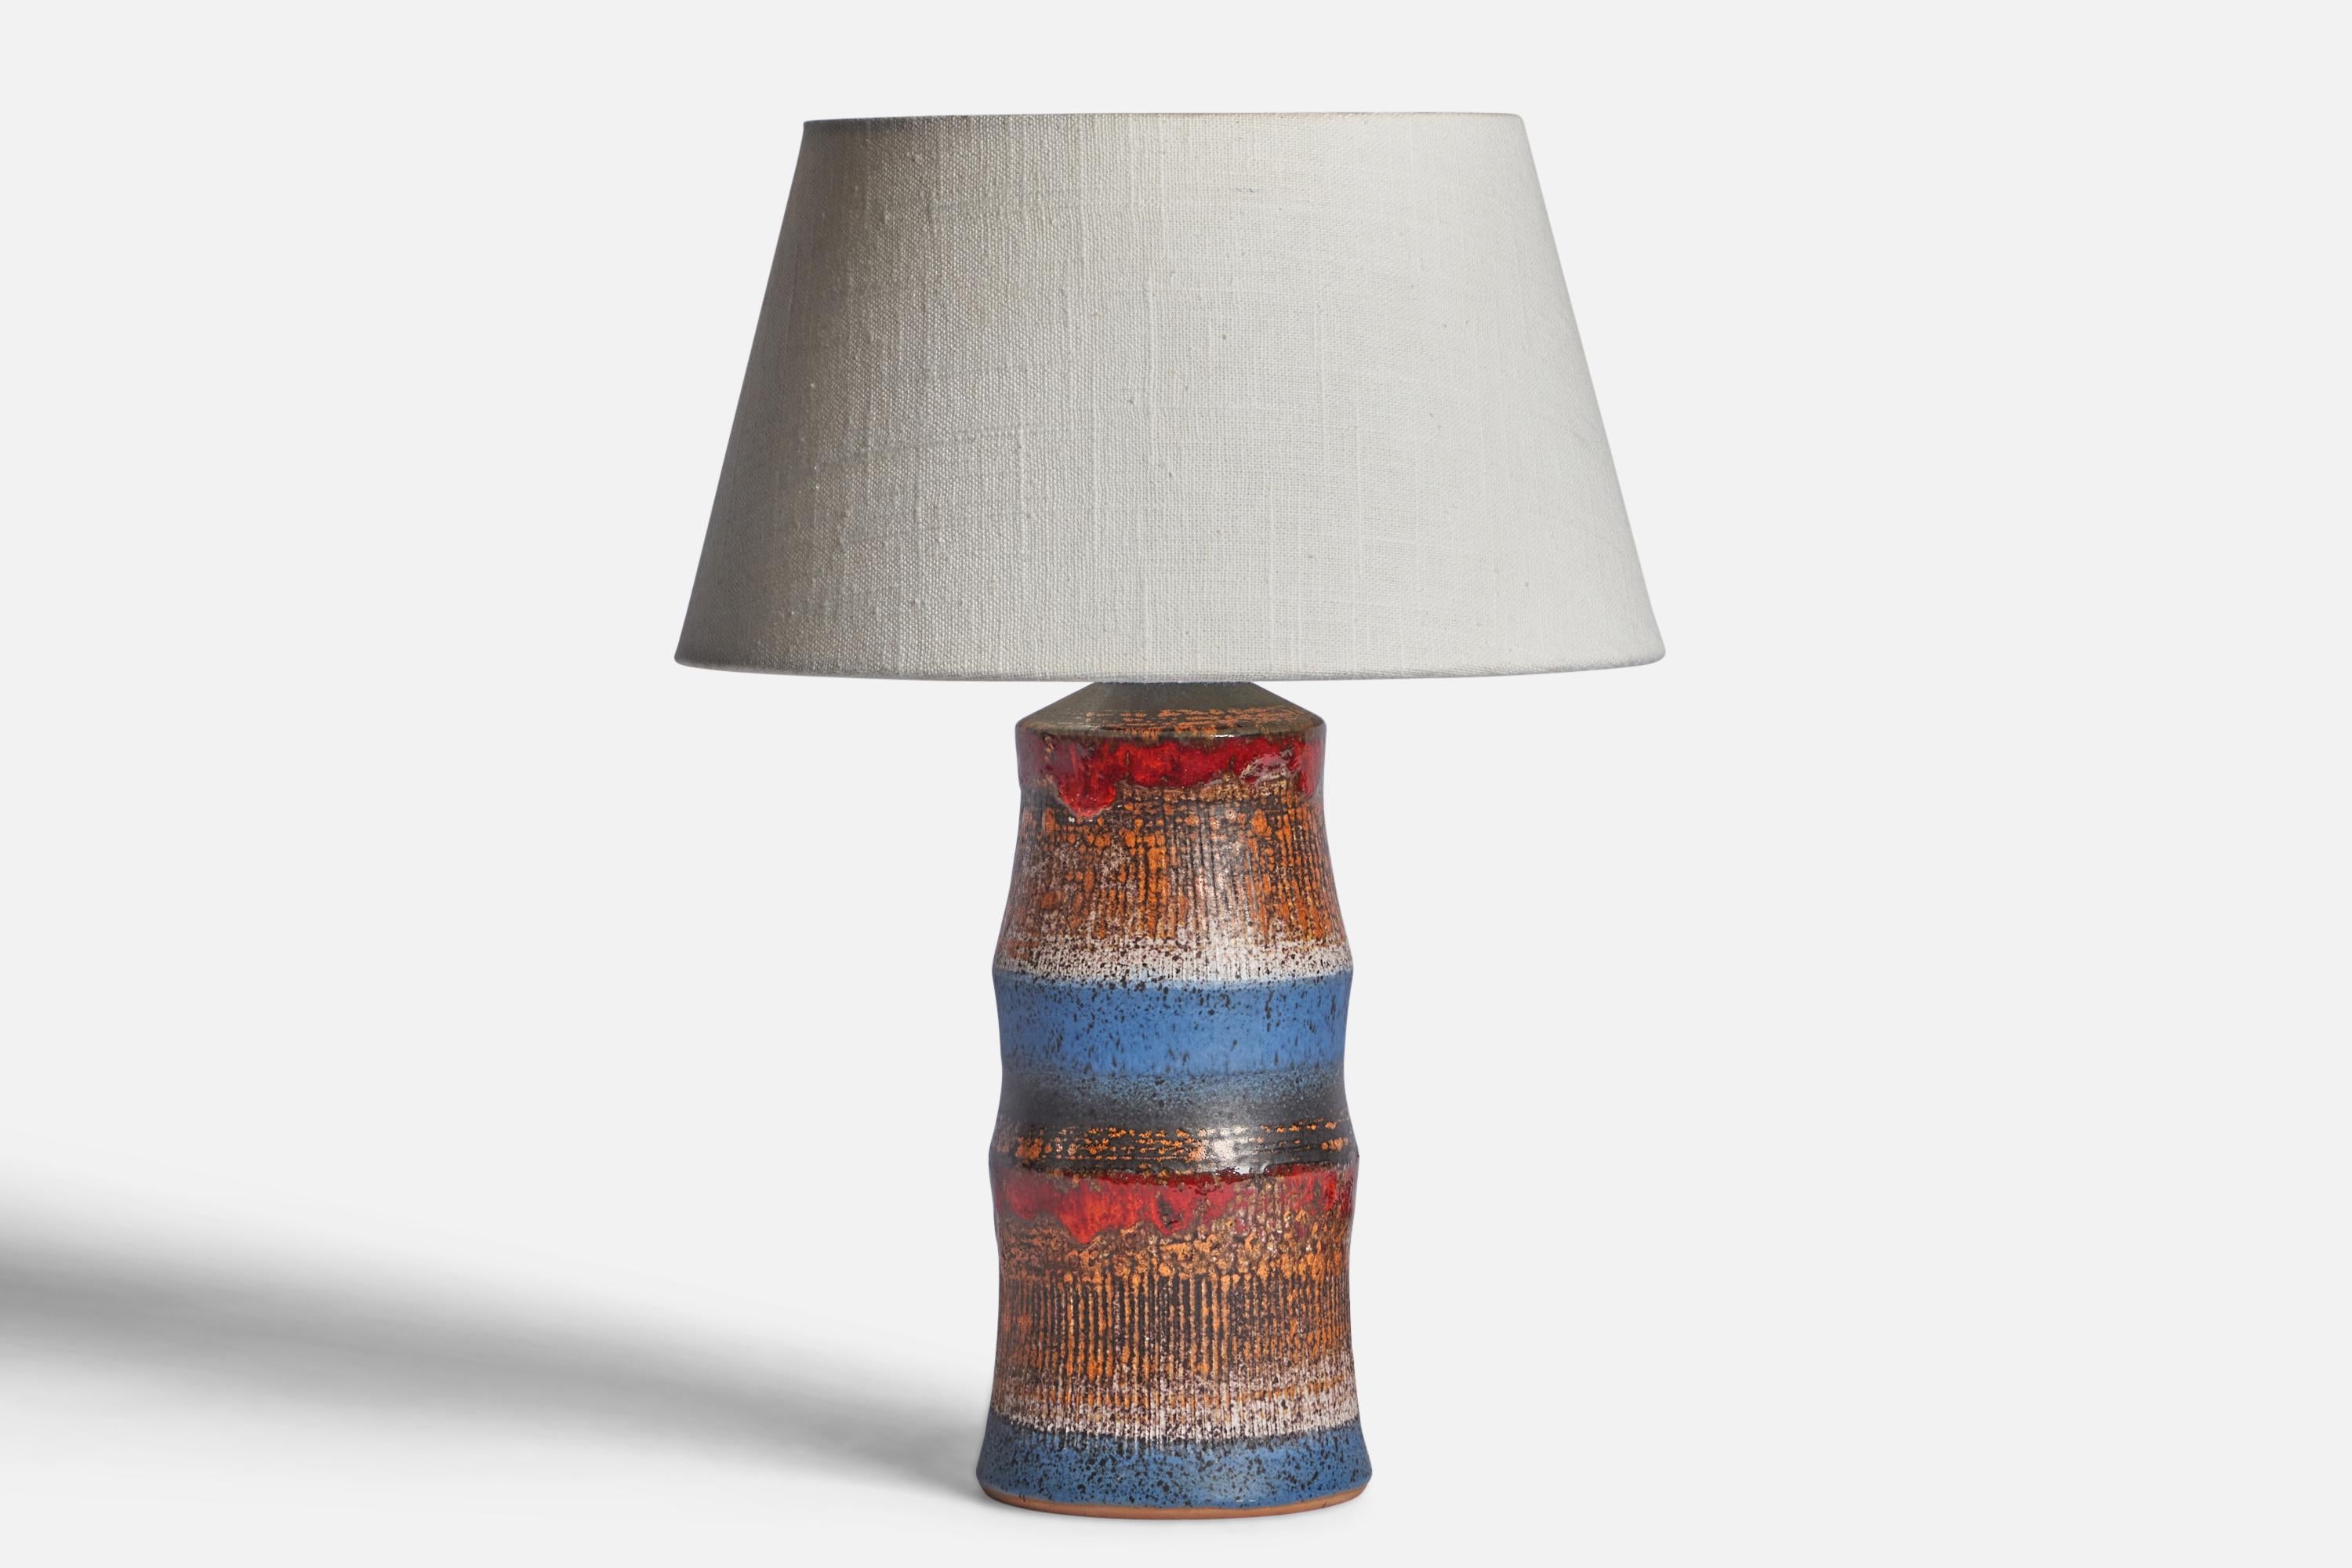 A brown, blue and red-glazed stoneware table lamp designed and produced by Tilgmans Keramik, Sweden, 1960s.

Dimensions of Lamp (inches): 10.75” H x 4” Diameter
Dimensions of Shade (inches): 7” Top Diameter x 10” Bottom Diameter x 5.5” H 
Dimensions